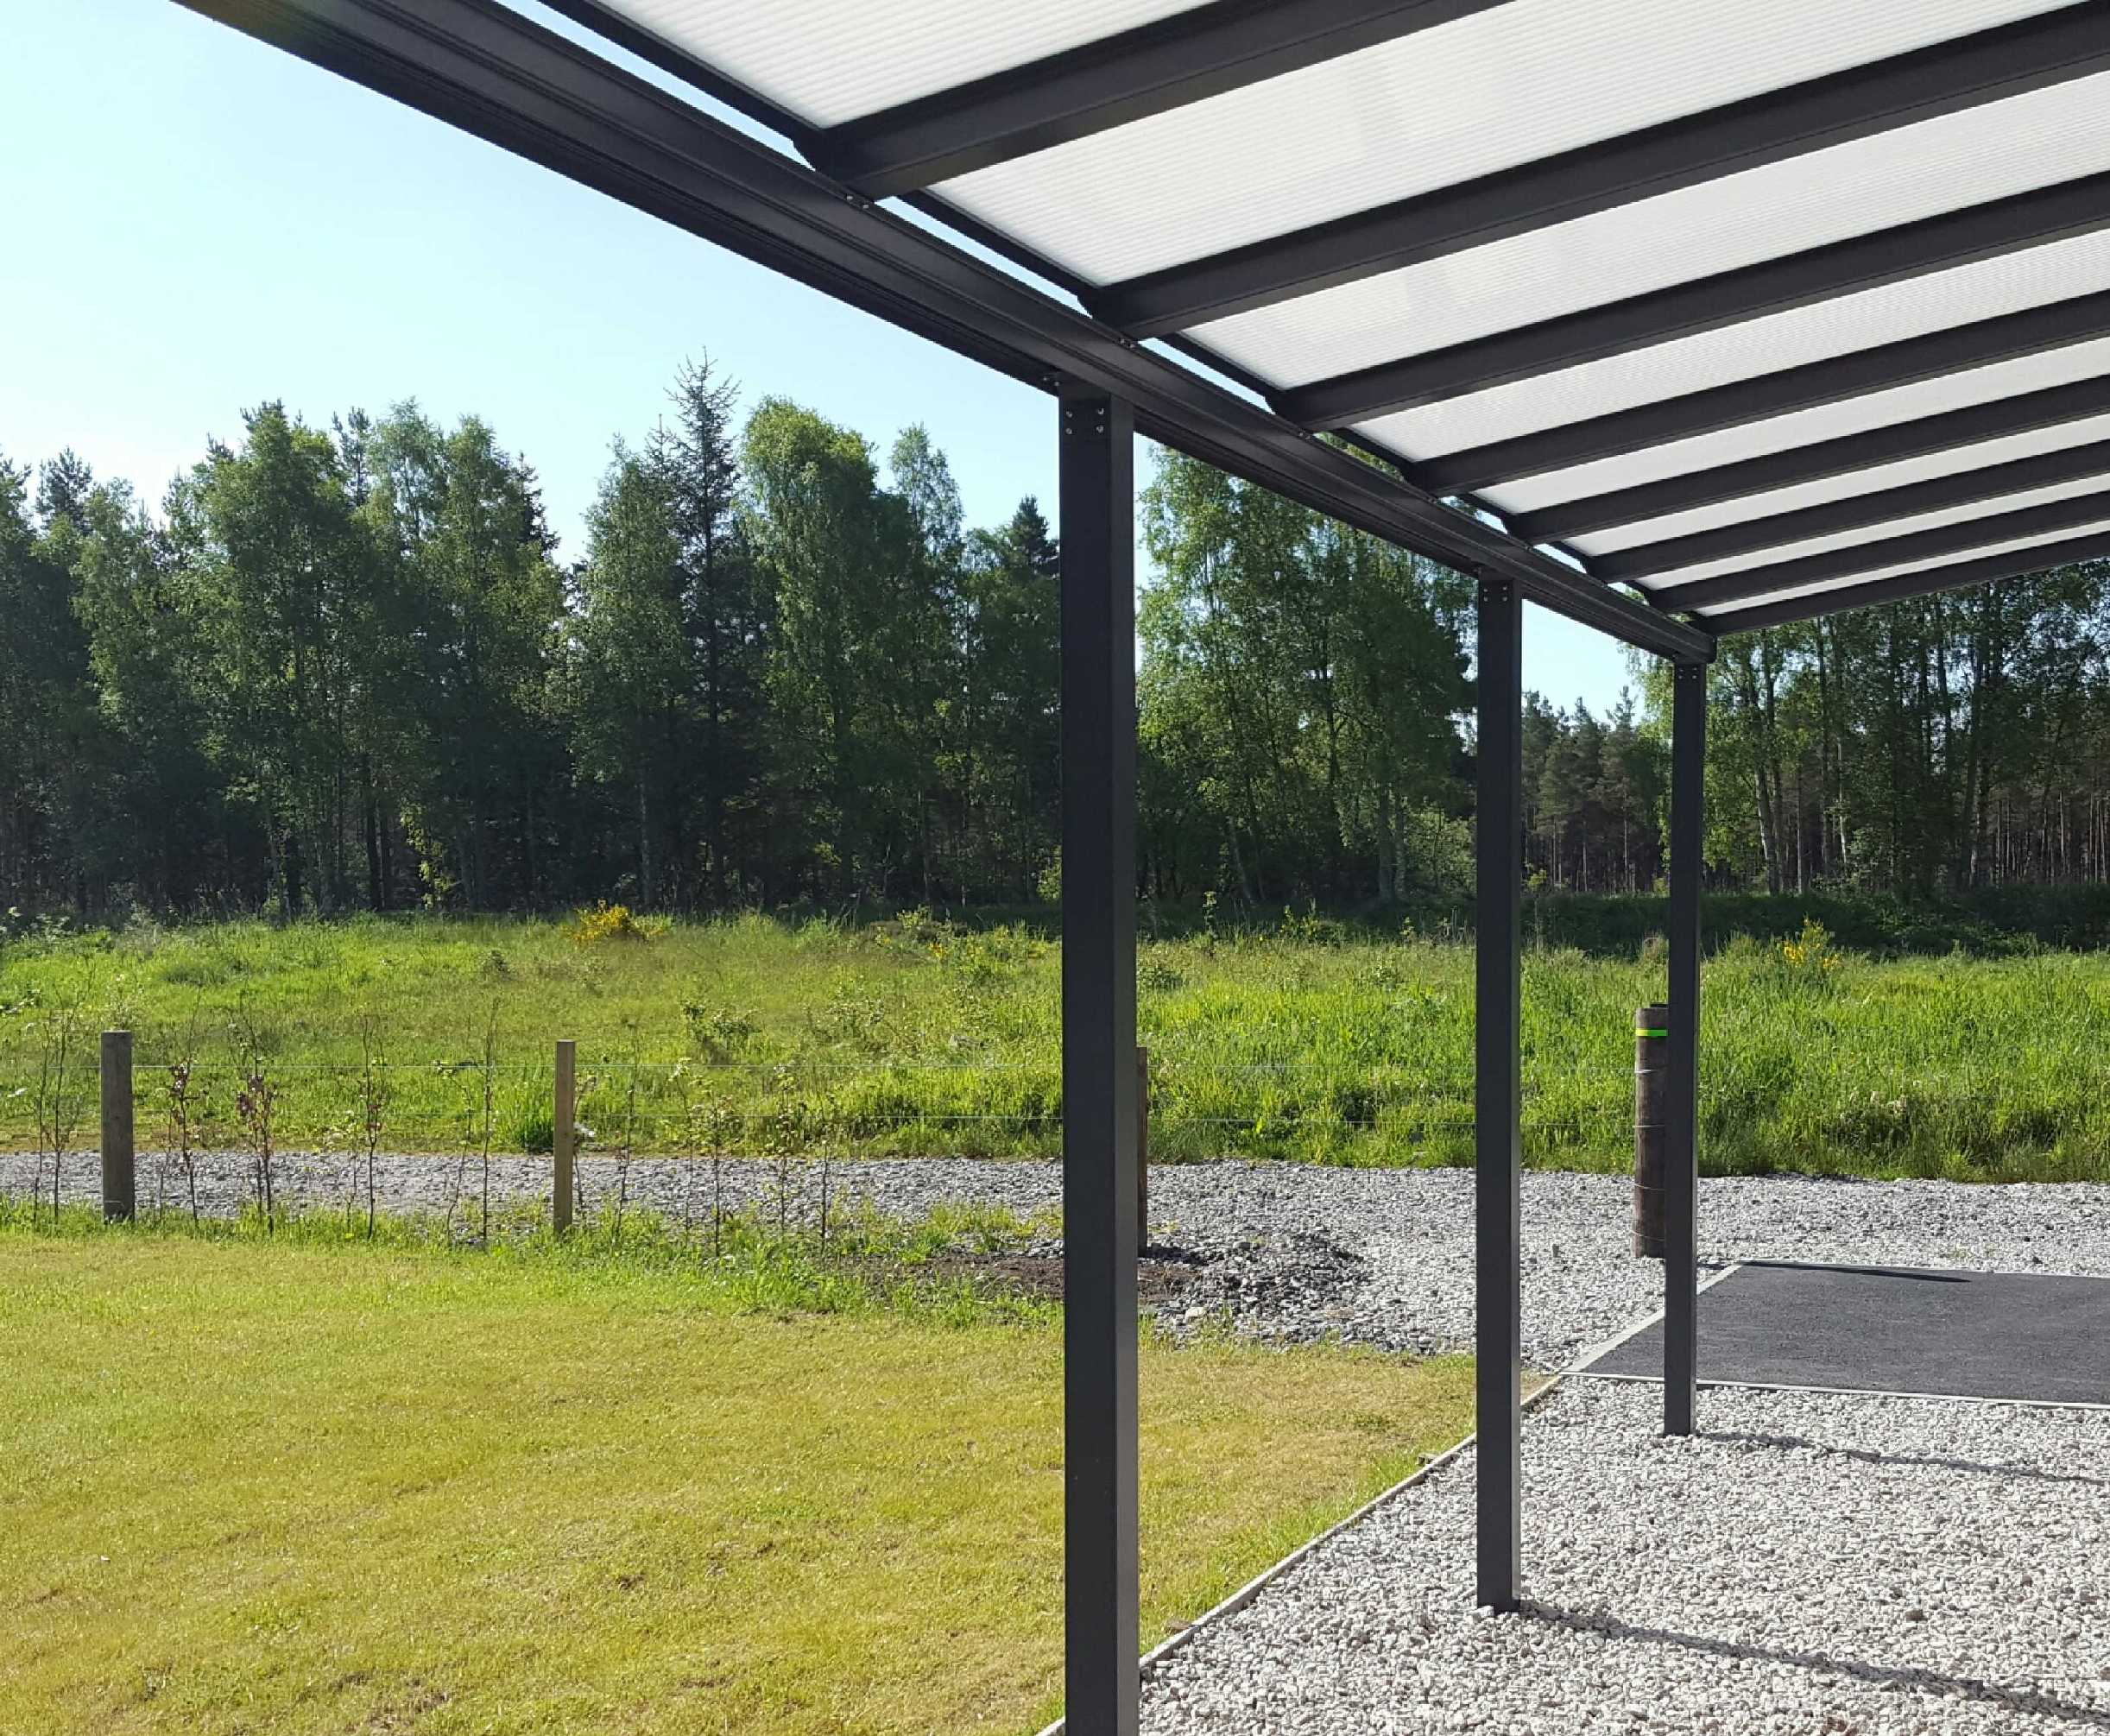 Omega Smart Lean-To Canopy, Anthracite Grey, 6mm Glass Clear Plate Polycarbonate Glazing - 3.5m (W) x 3.0m (P), (3) Supporting Posts